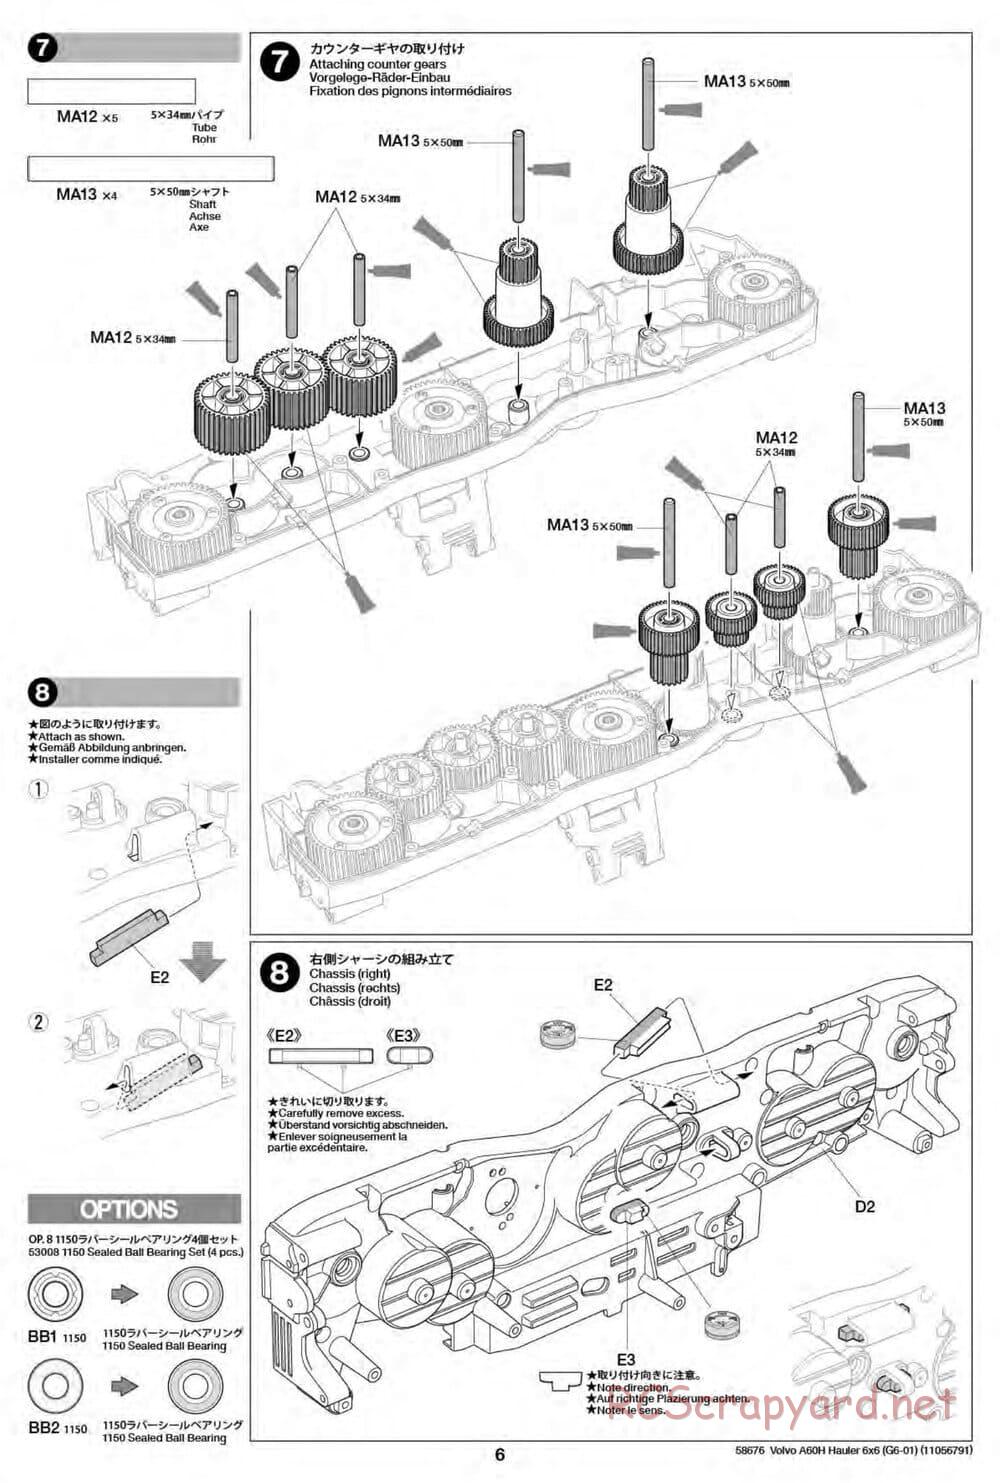 Tamiya - Volvo A60H Dump Truck 6x6 - G6-01 Chassis - Manual - Page 6